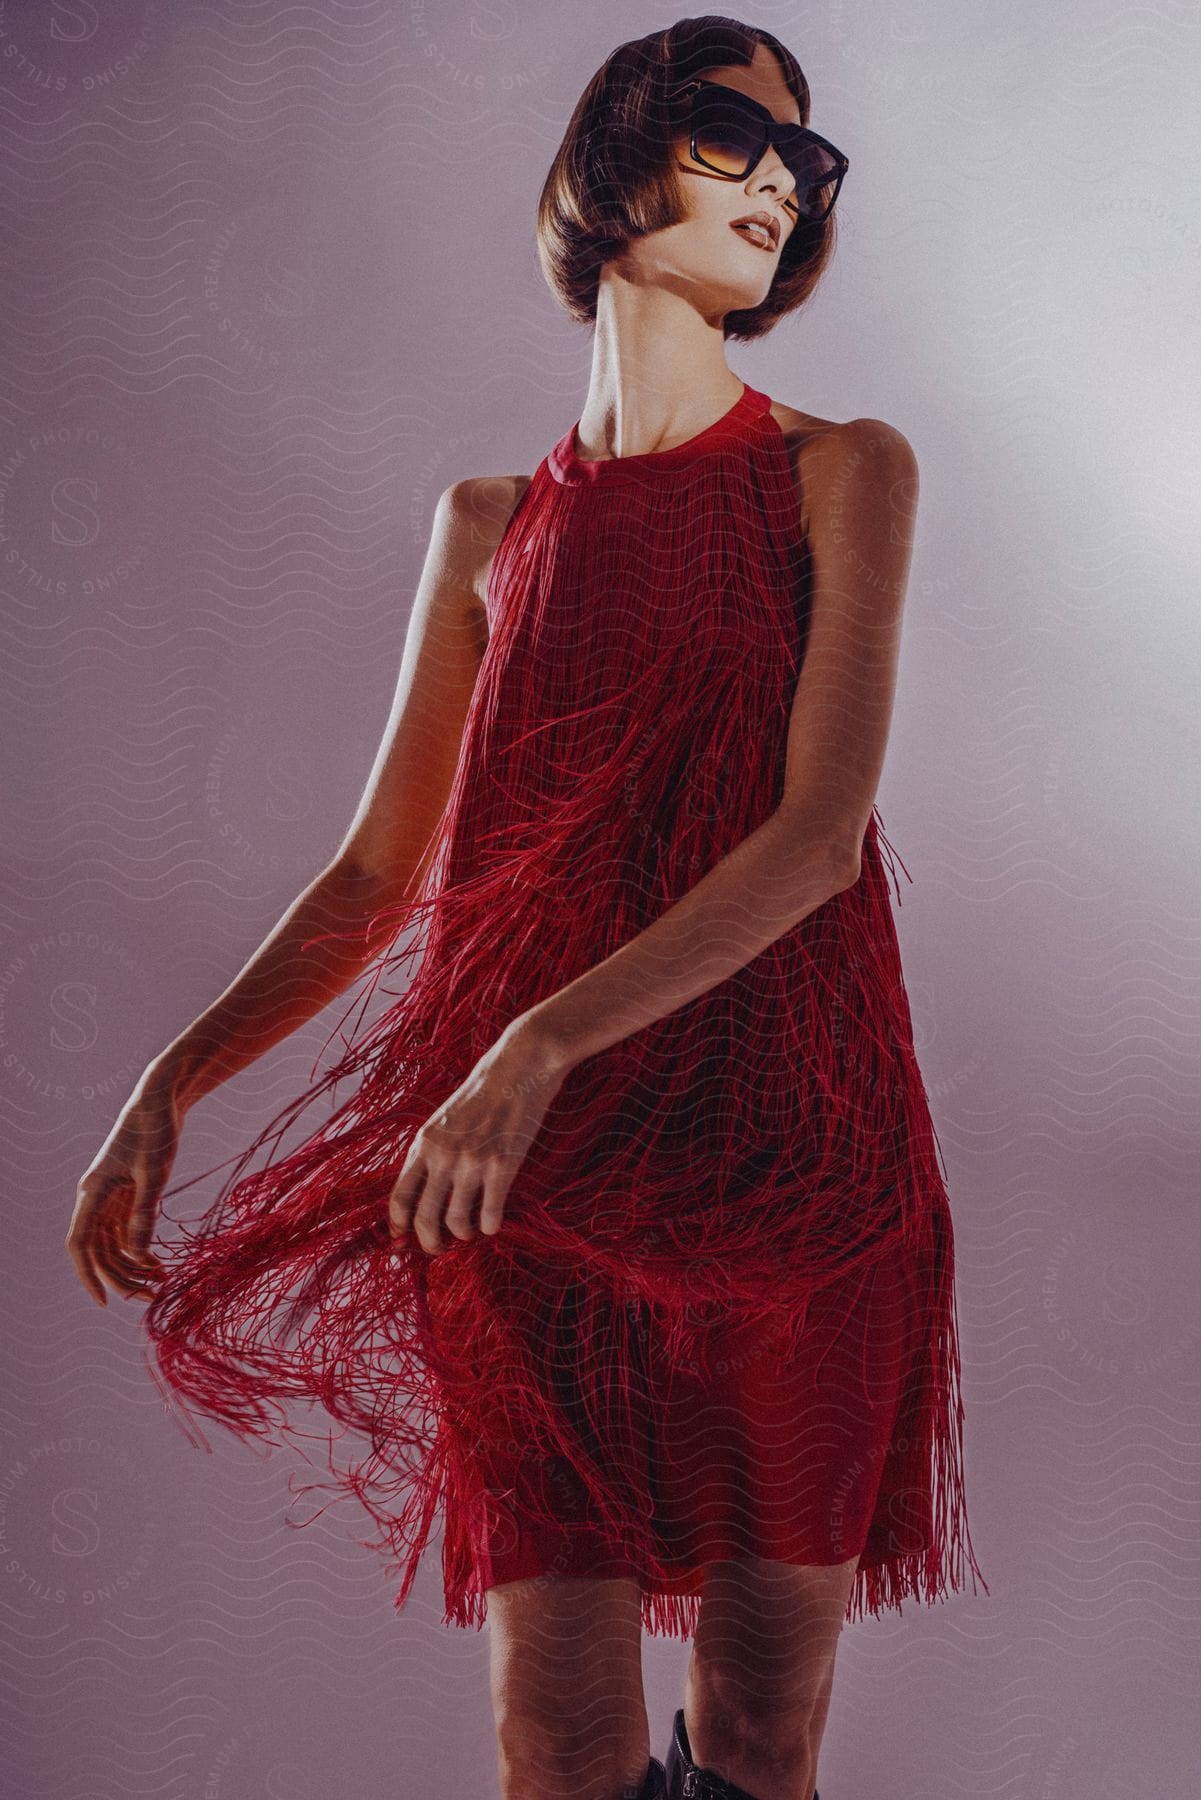 Woman wearing sunglasses and red tiered fringe mini dress poses for the camera